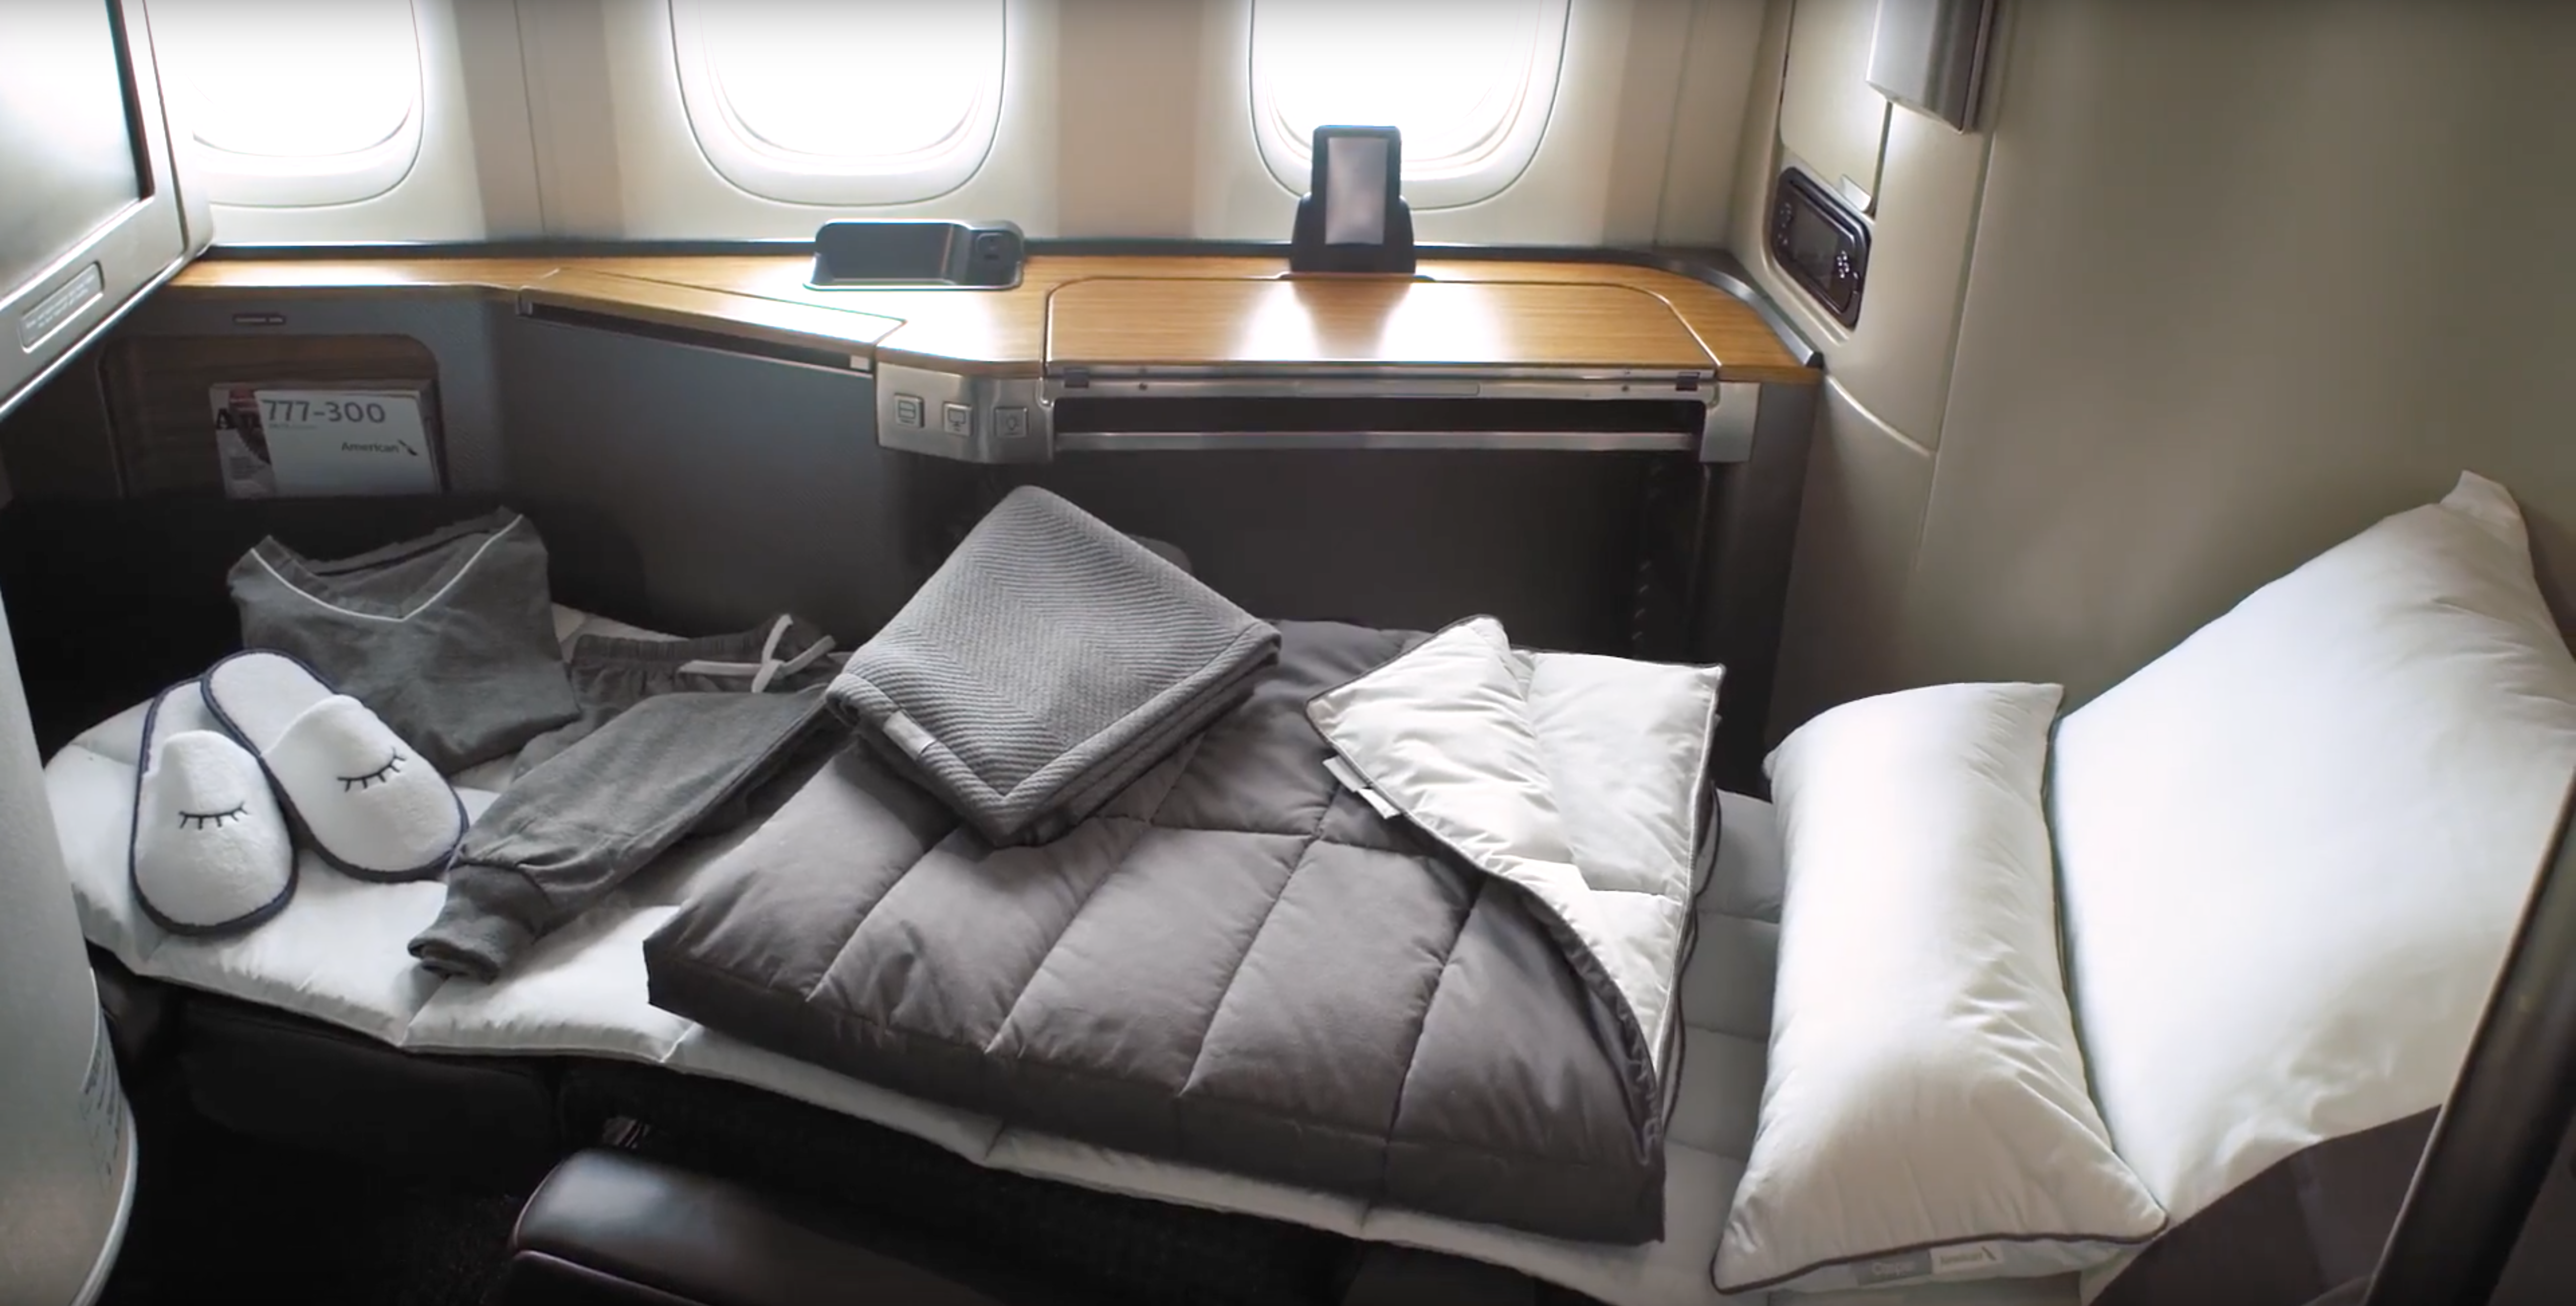 The full range of Casper products in American Airlines long-haul First Class. Source: American Airlines